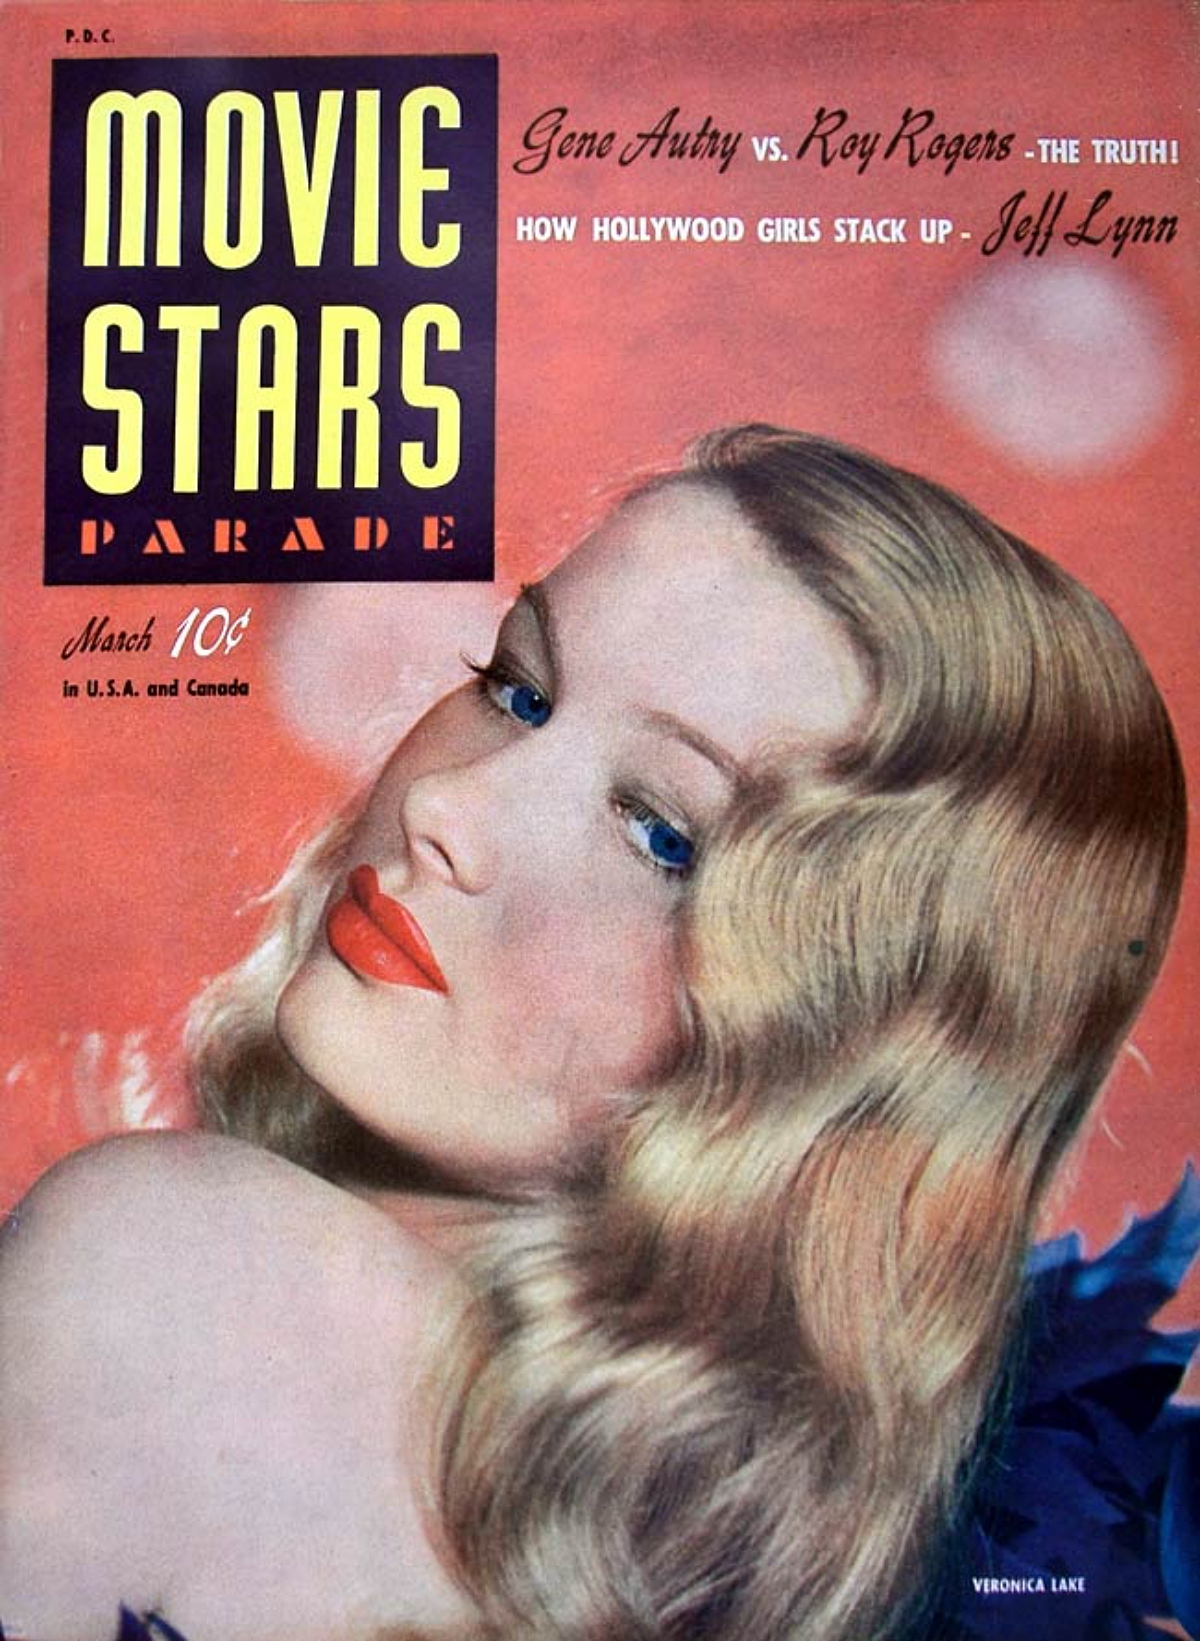 Veronica Lake sultry hairstyle